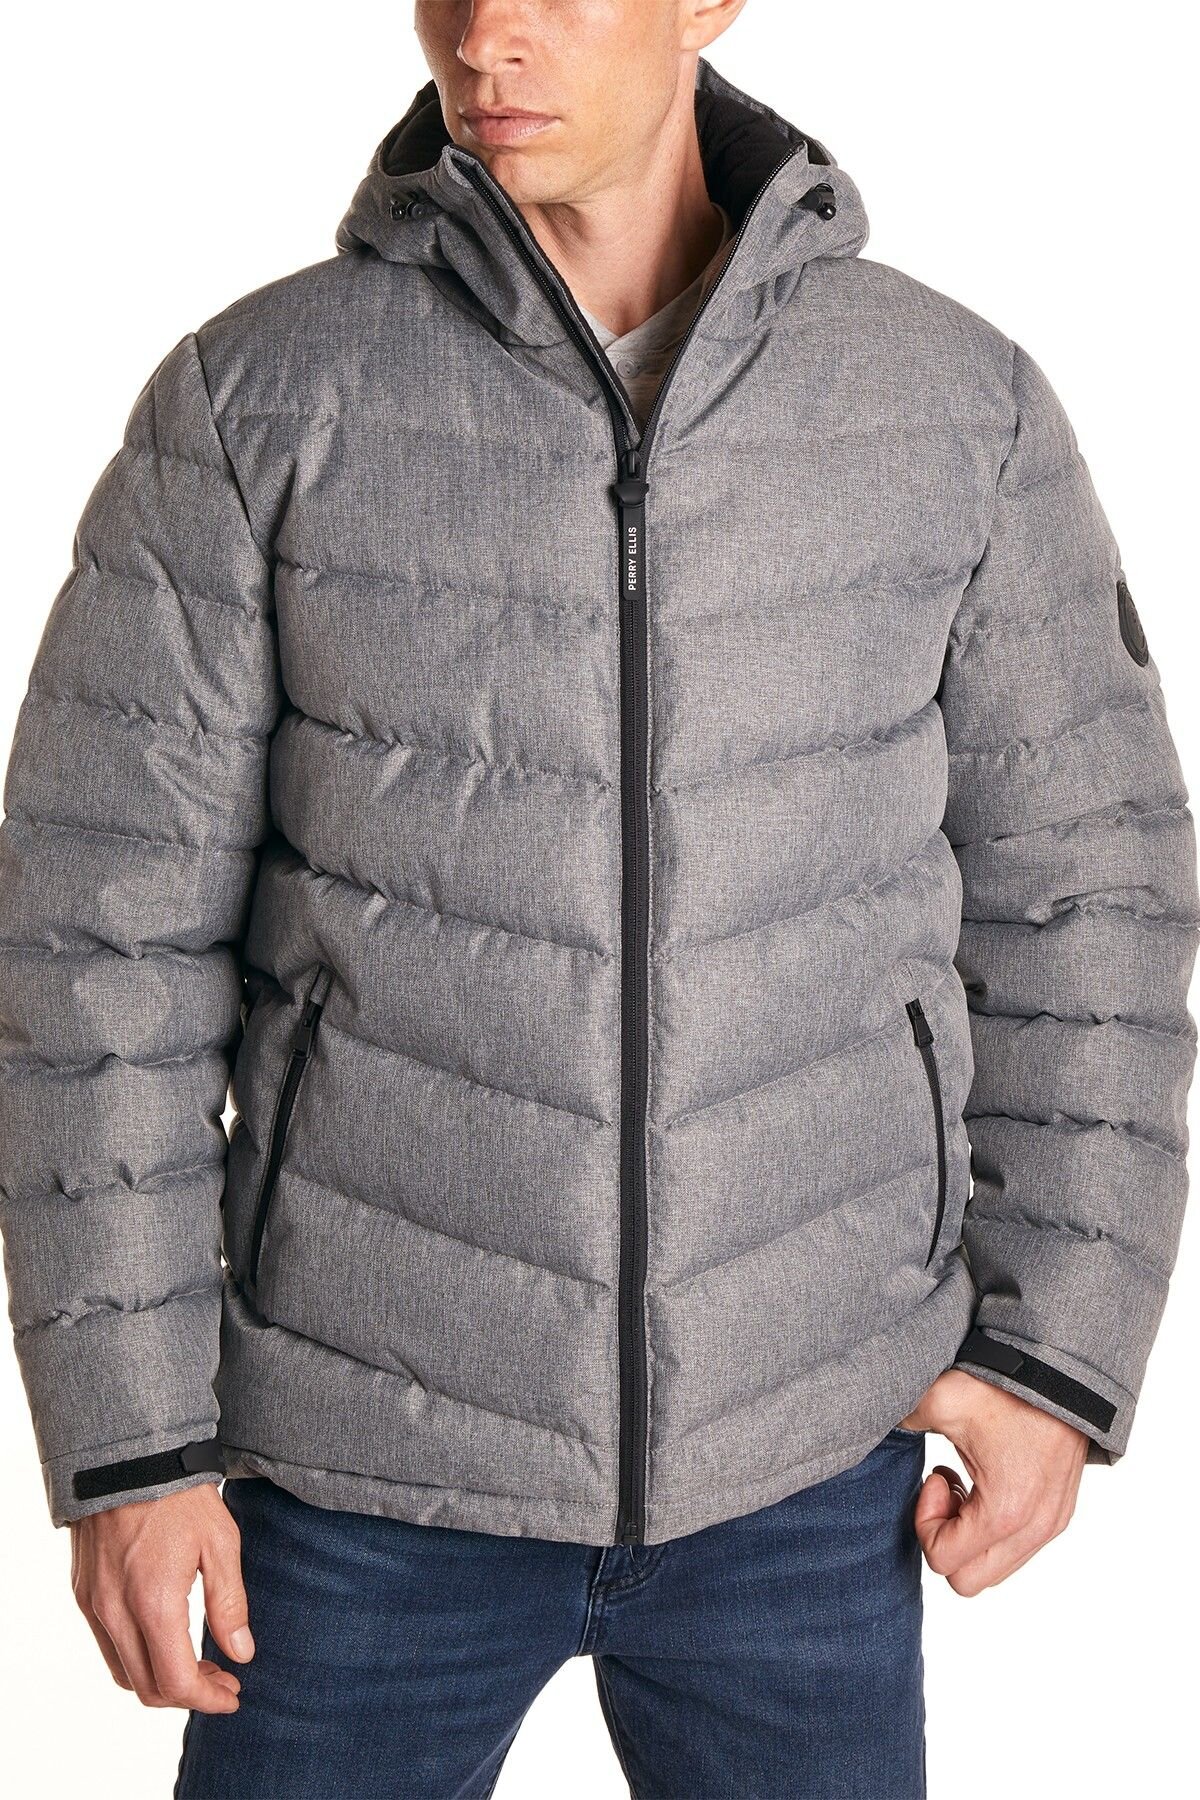 The Perry Ellis Quilted Puffer Jackets On Sale For 50% Off! — Clothes ...